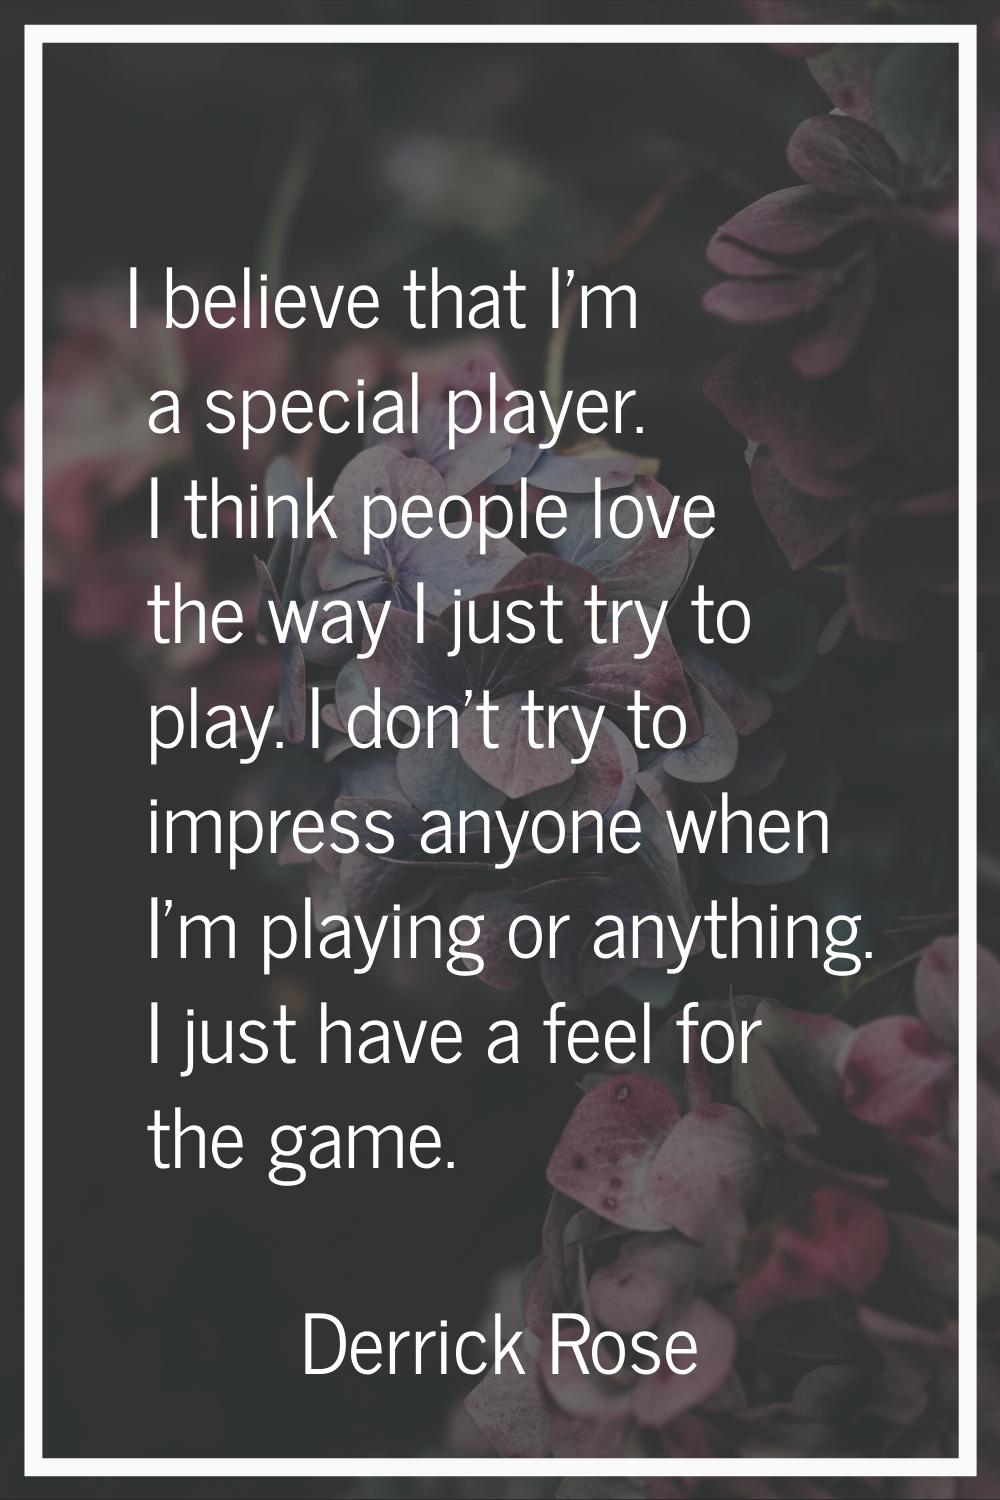 I believe that I'm a special player. I think people love the way I just try to play. I don't try to